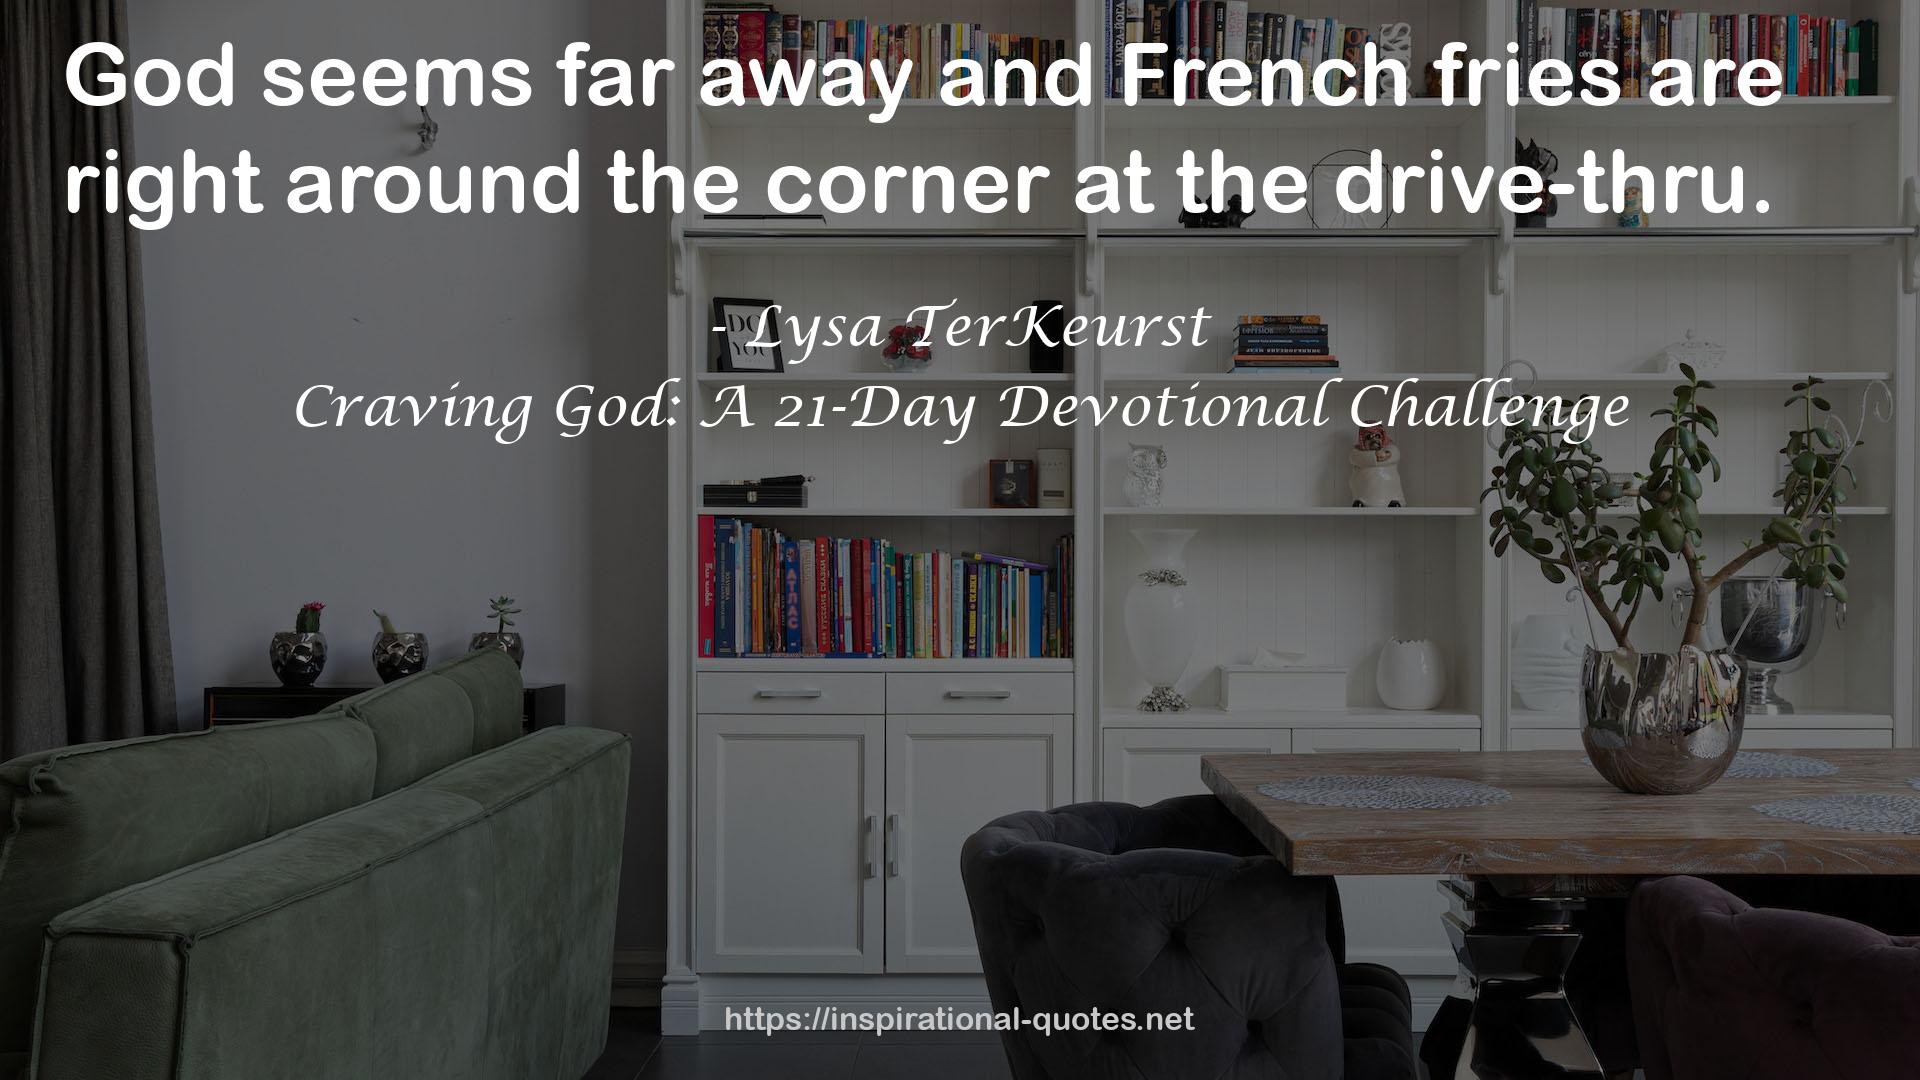 Craving God: A 21-Day Devotional Challenge QUOTES